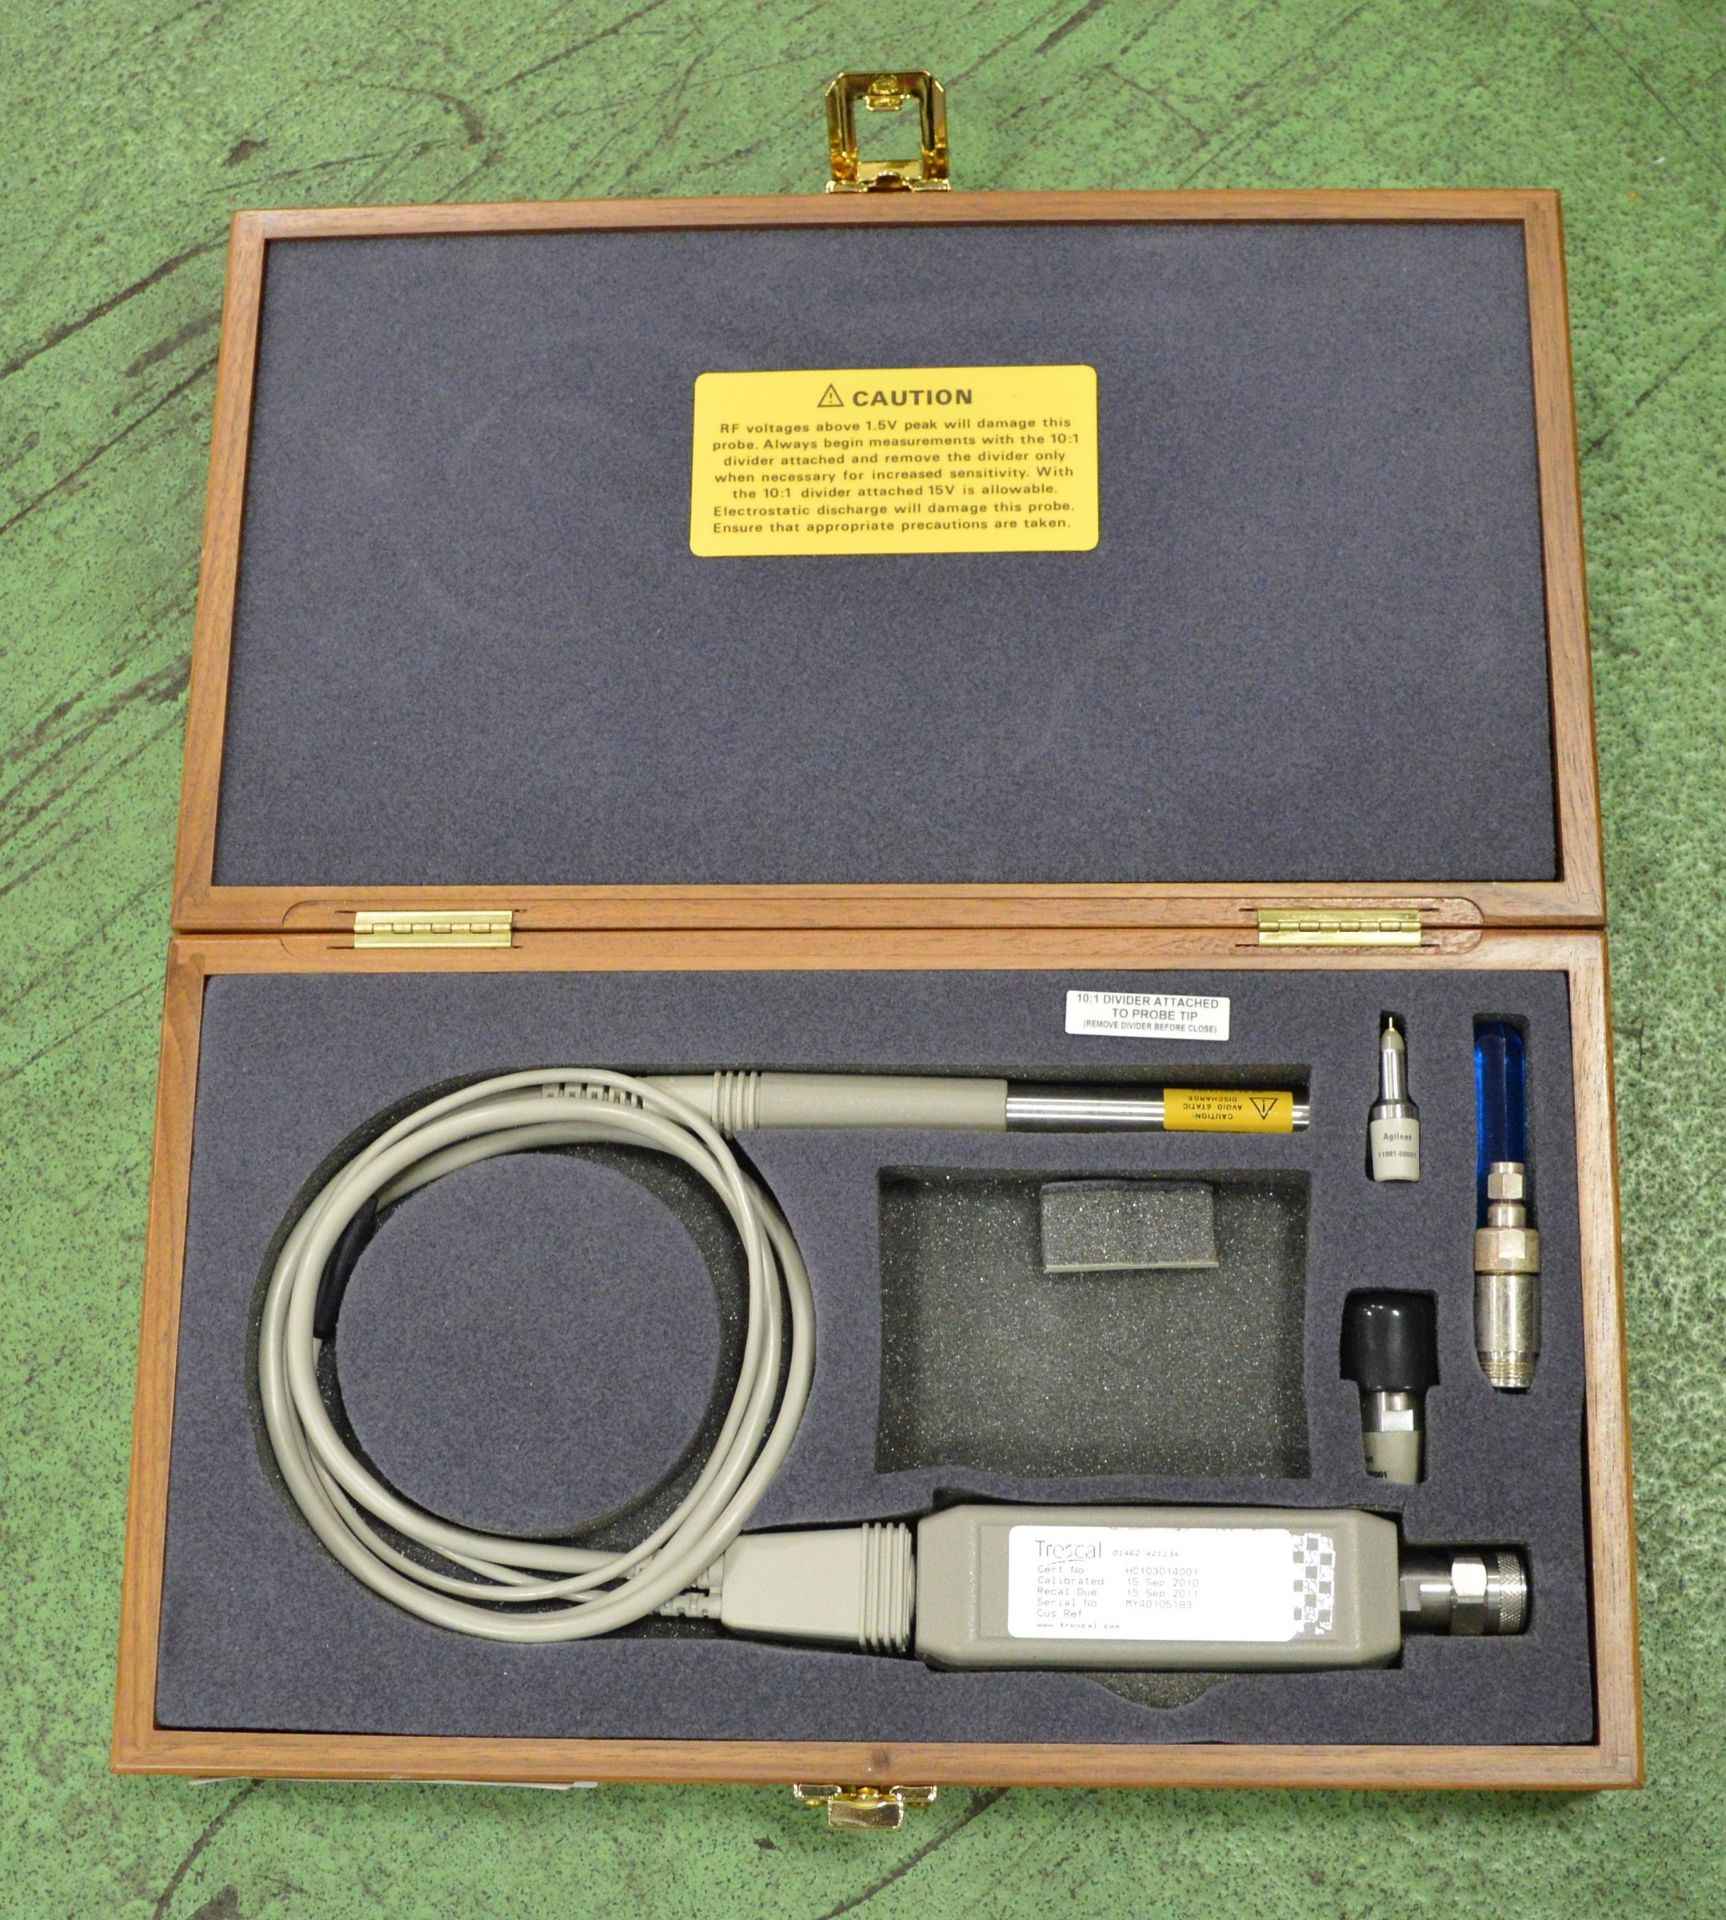 Agilent 85024A High Frequency Probe In Wood Case (Incomplete)